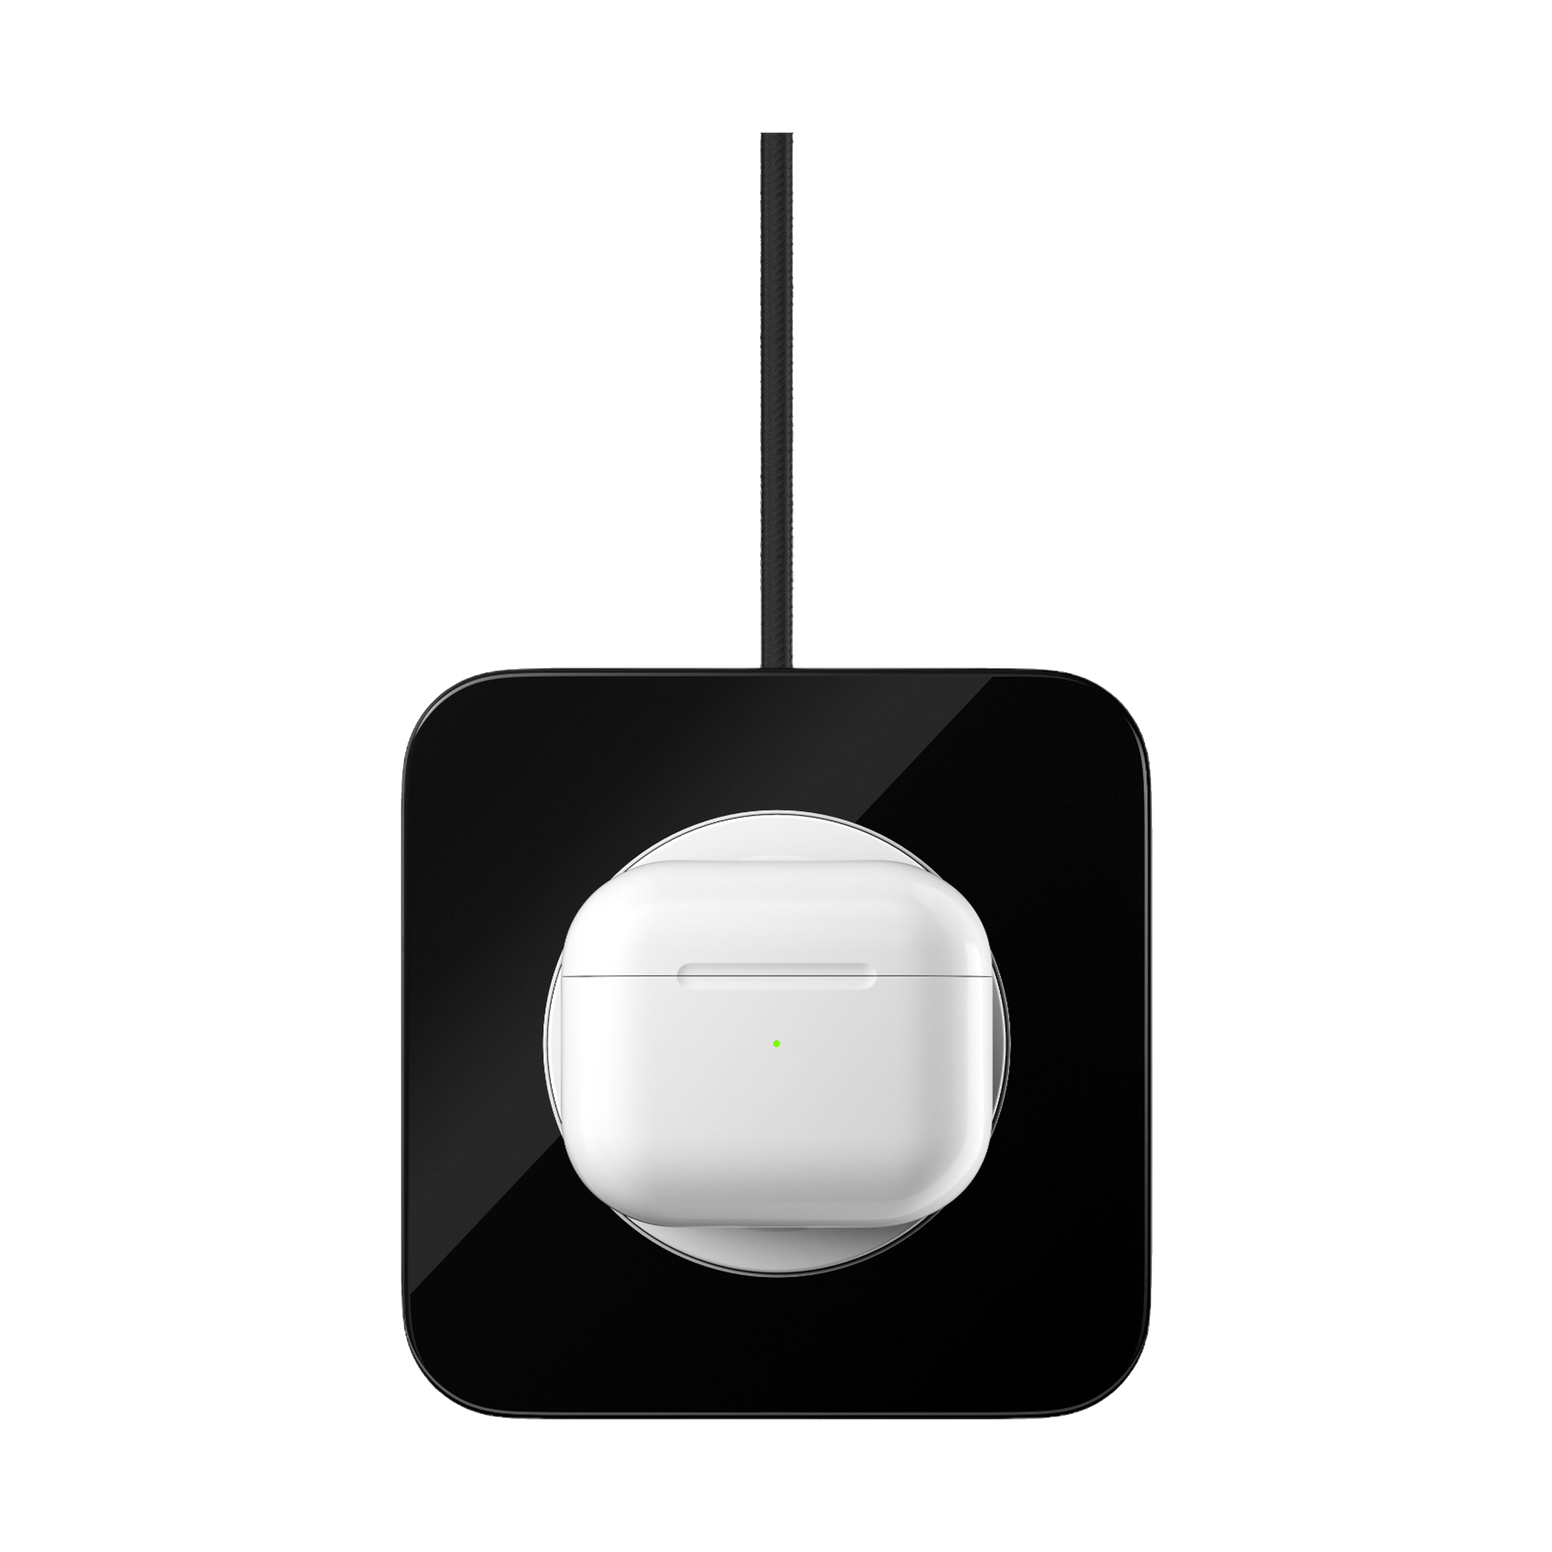 Nomad Base One with MagSafe - Carbide - Discontinued